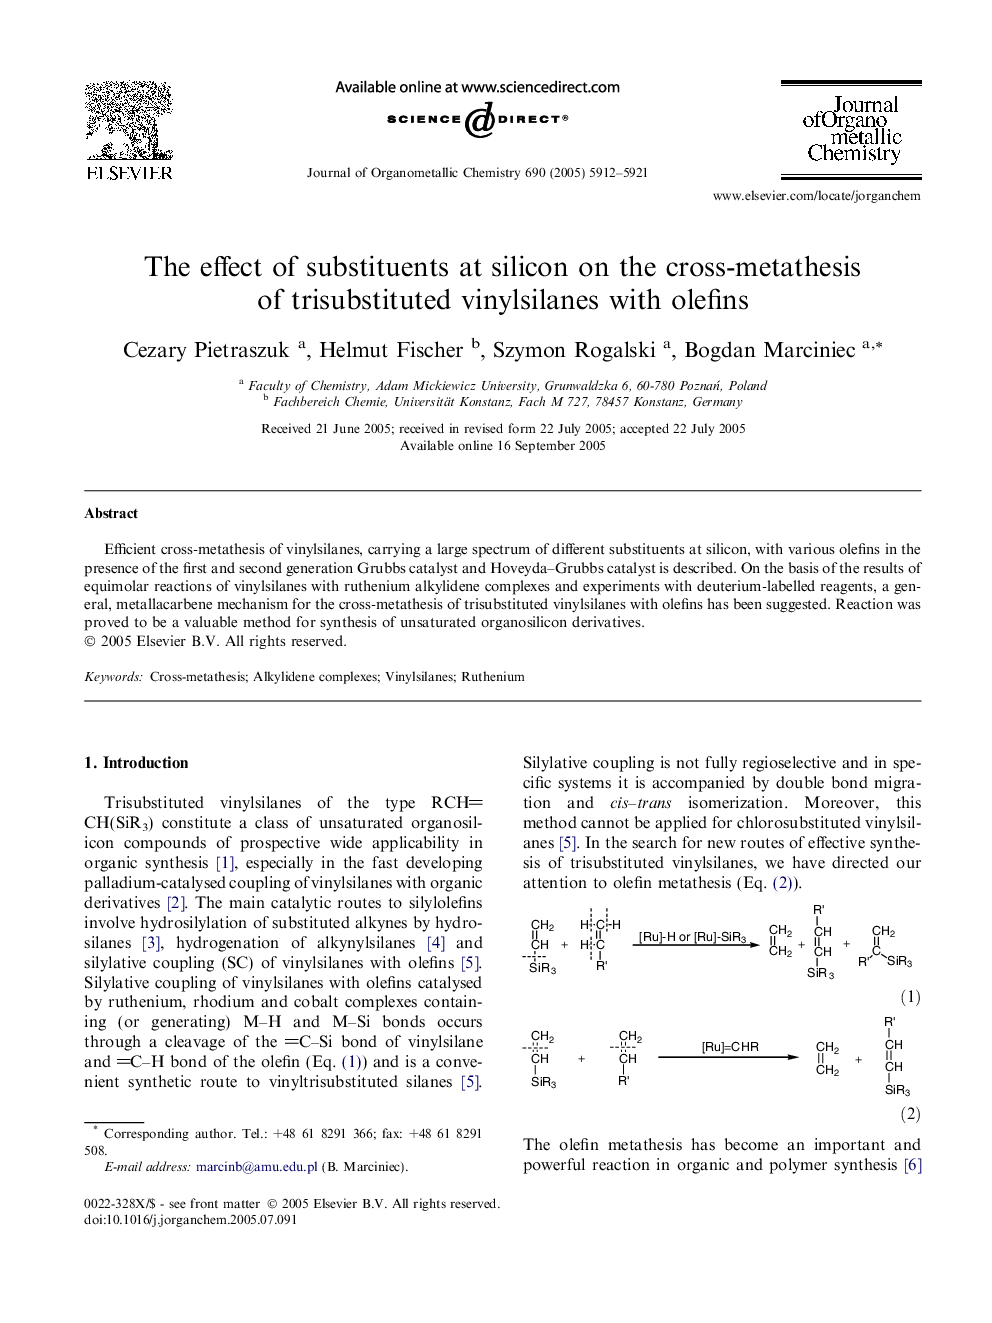 The effect of substituents at silicon on the cross-metathesis of trisubstituted vinylsilanes with olefins